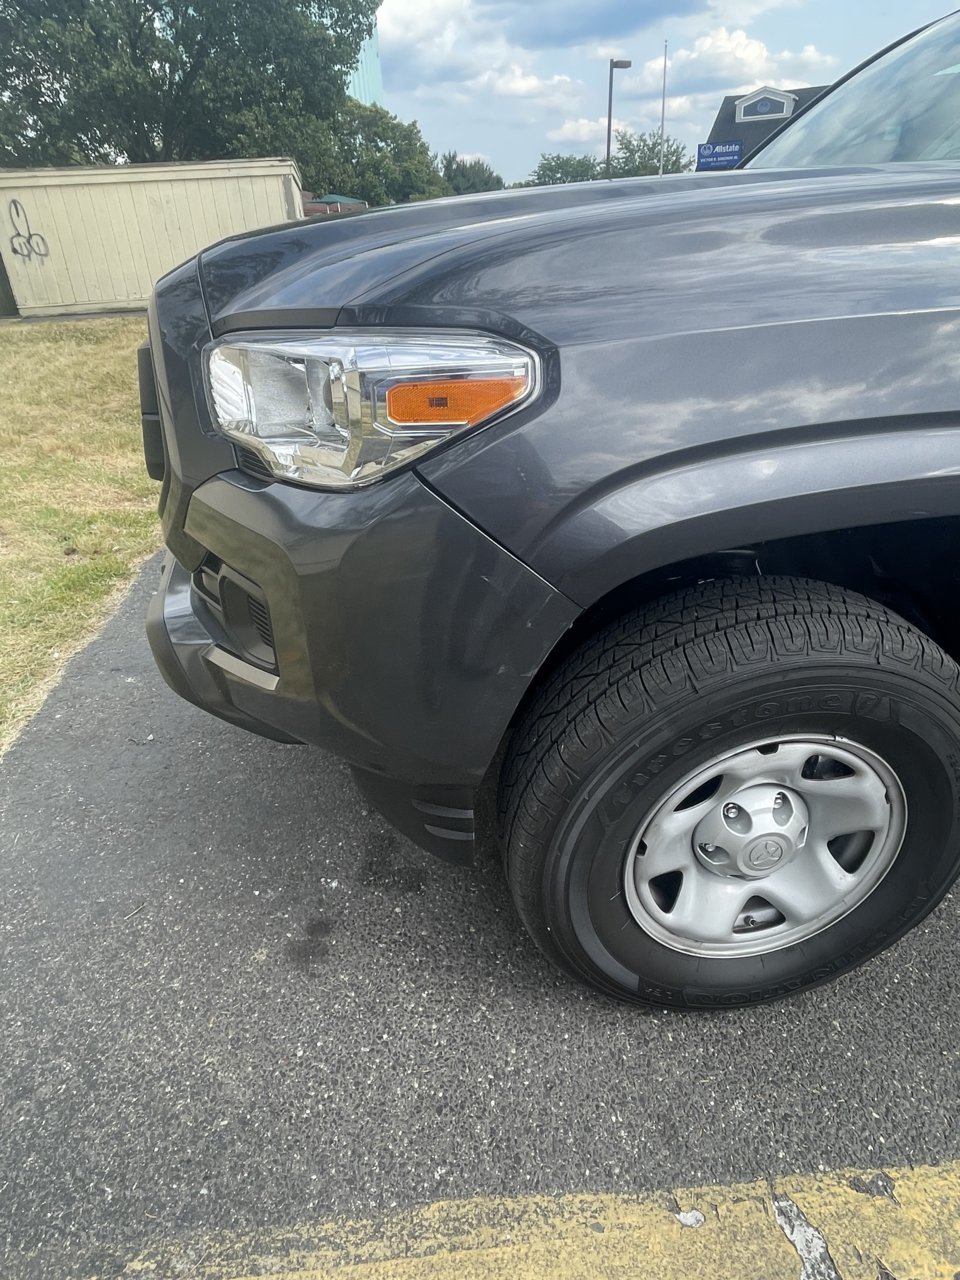 How to fix bumper cover after fender bender